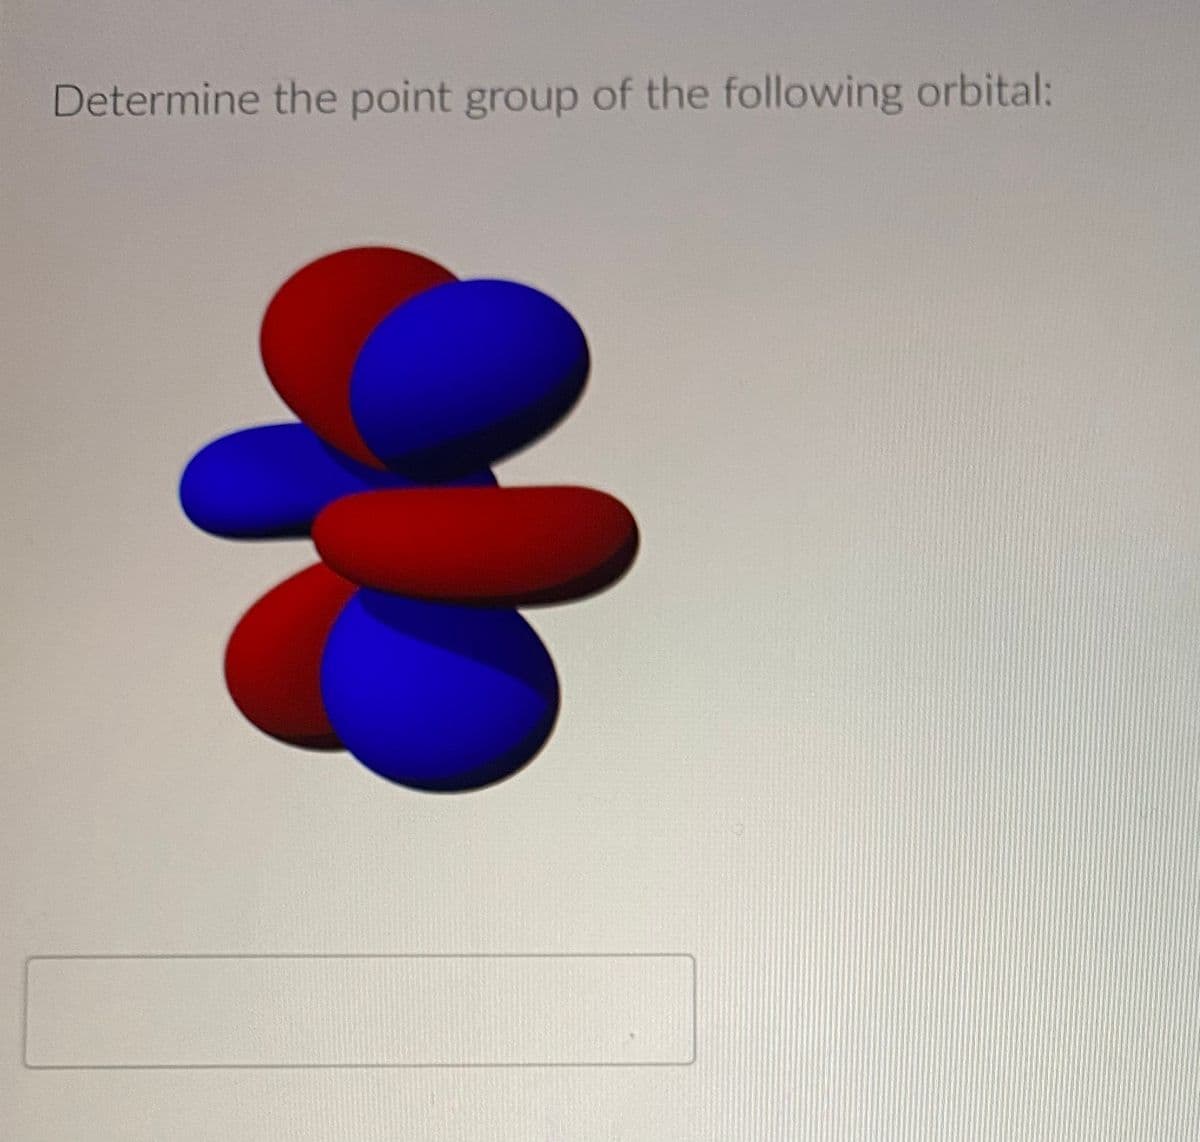 Determine the point group of the following orbital:
